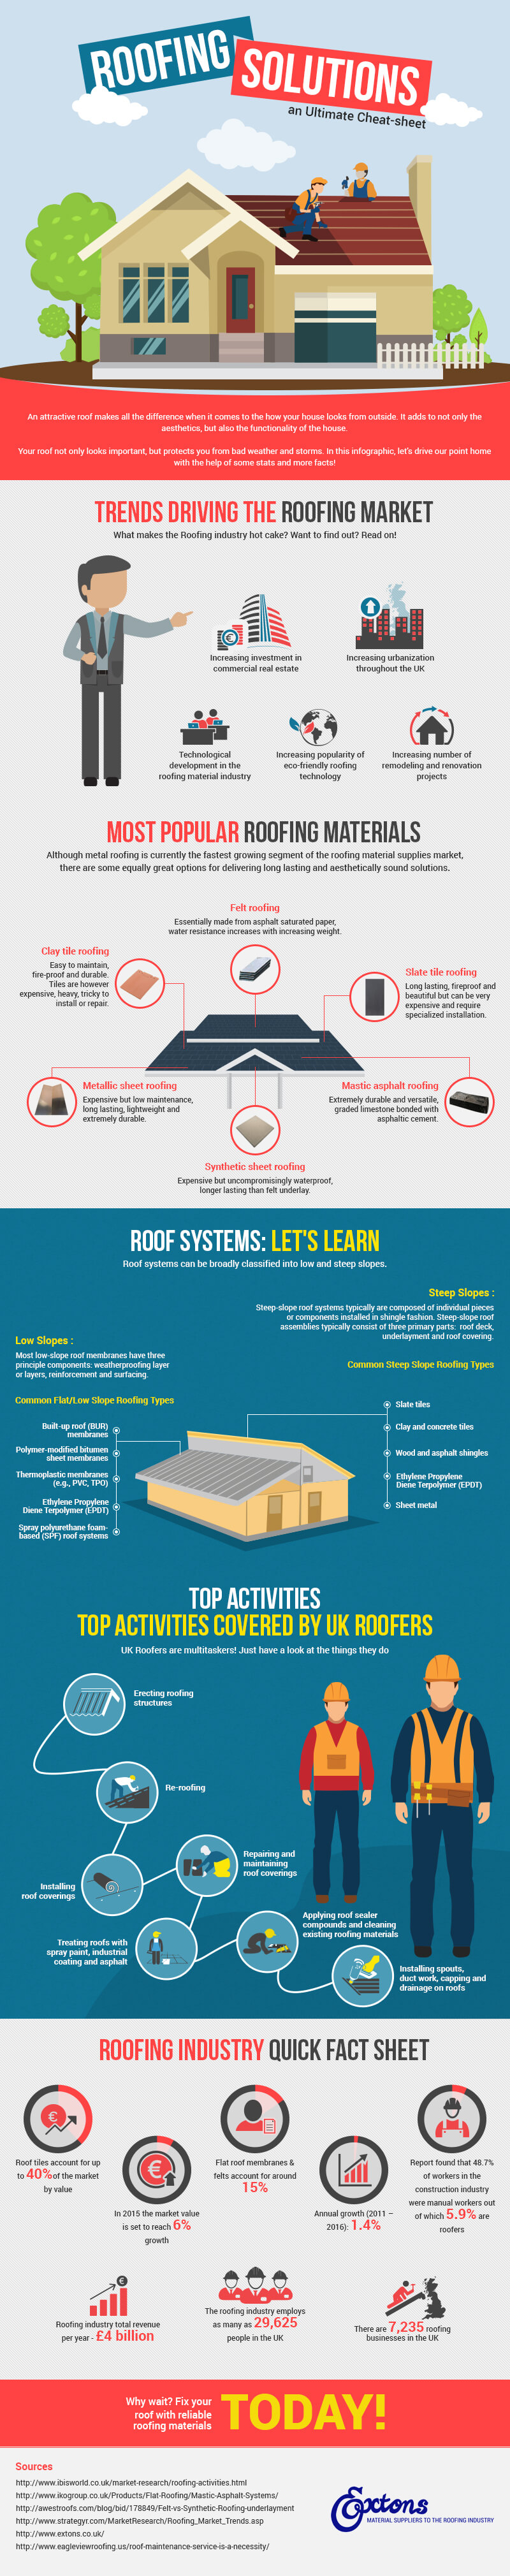 Roofing Solutions Cheat Sheet by Extons